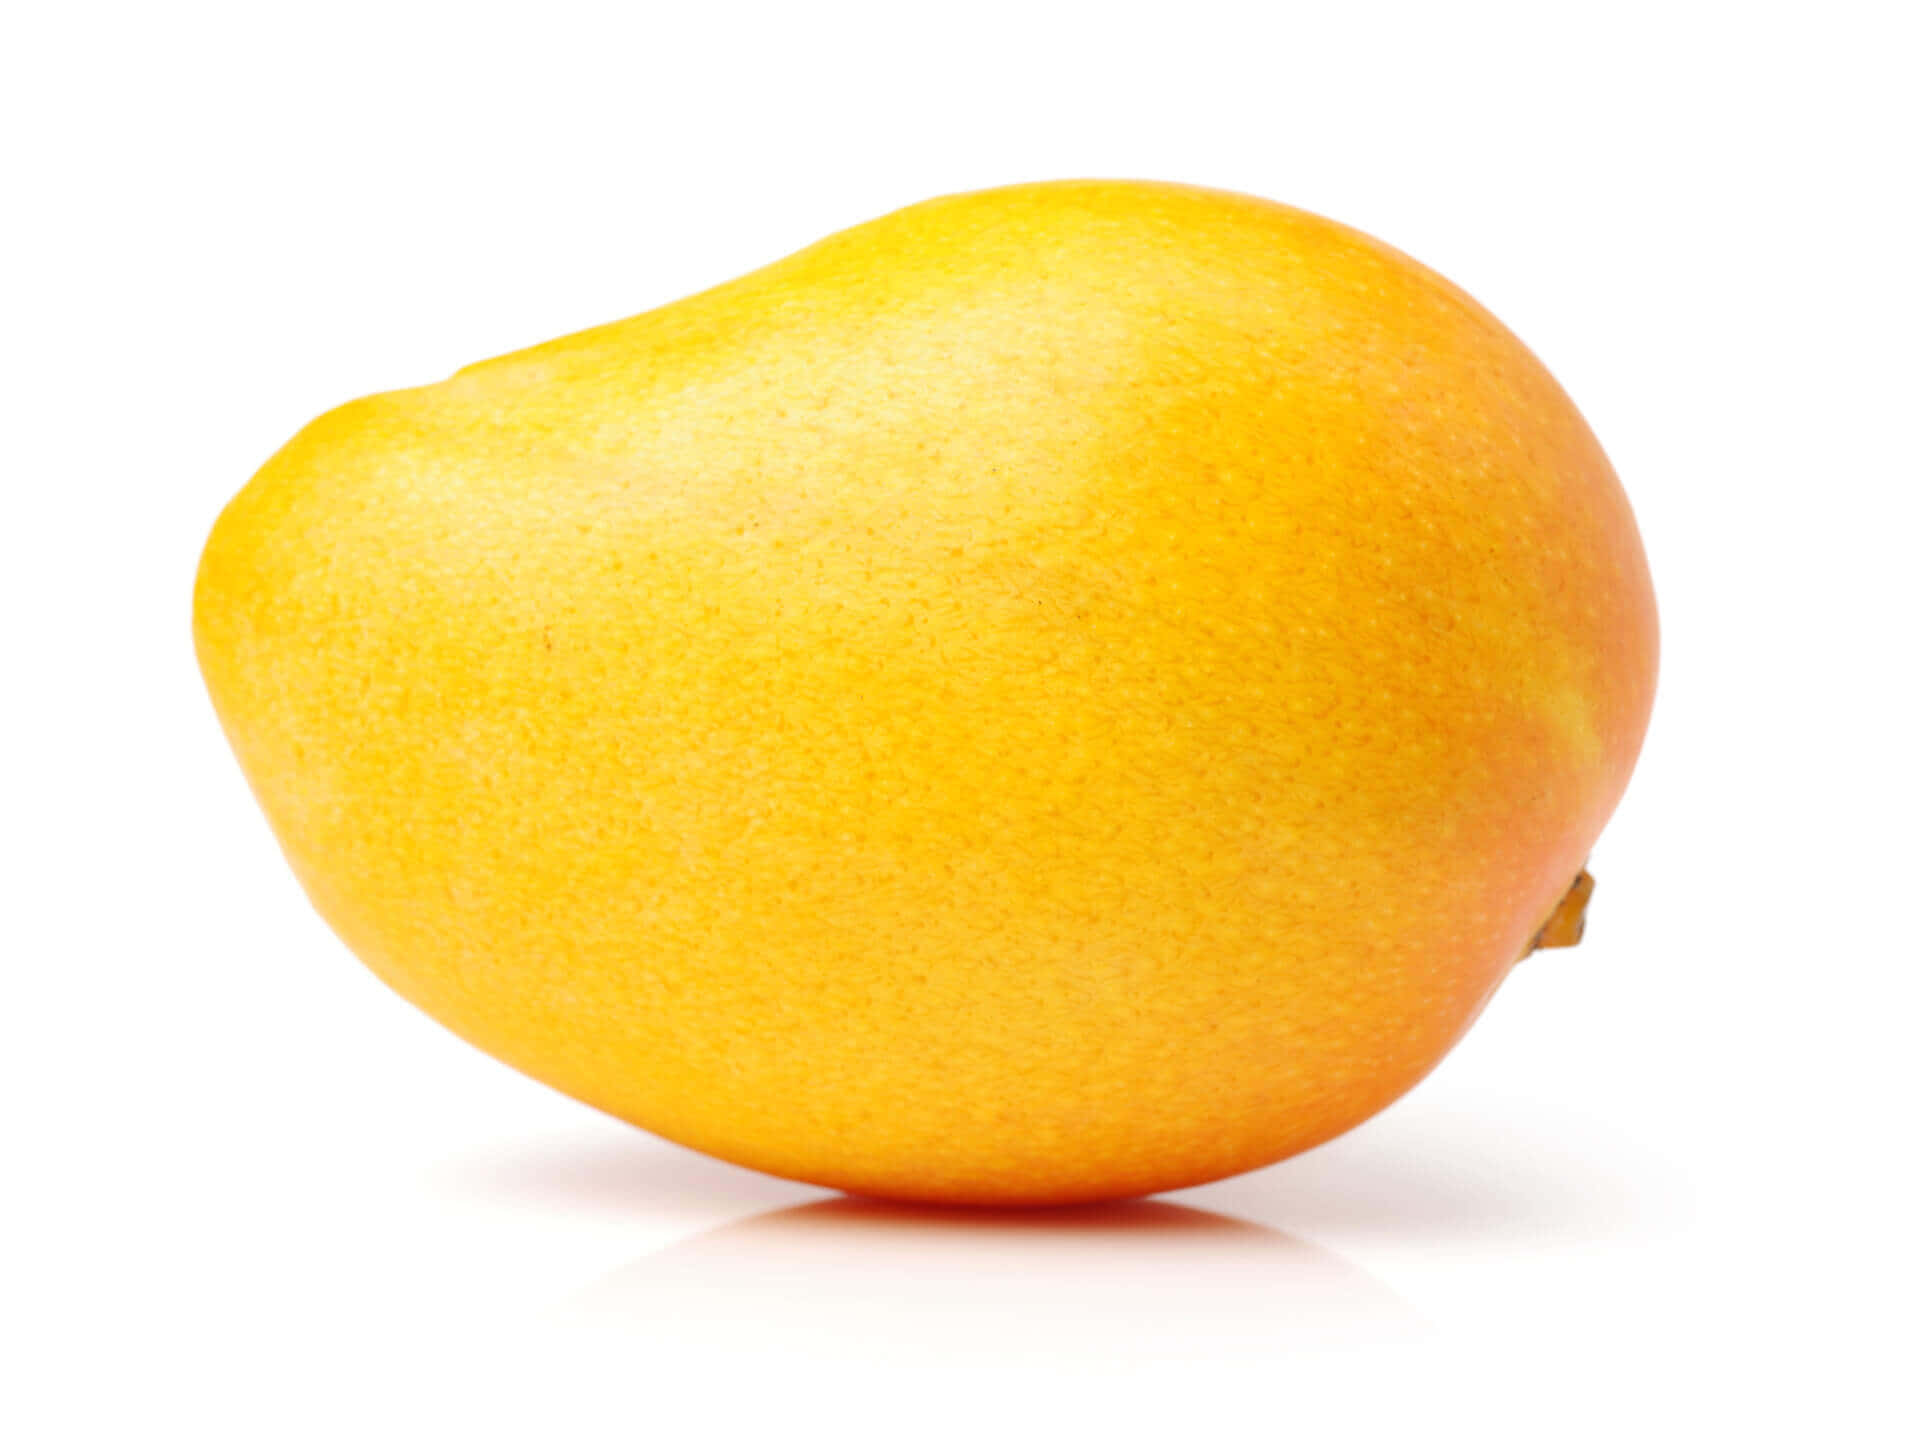 A Yellow Fruit On A White Background